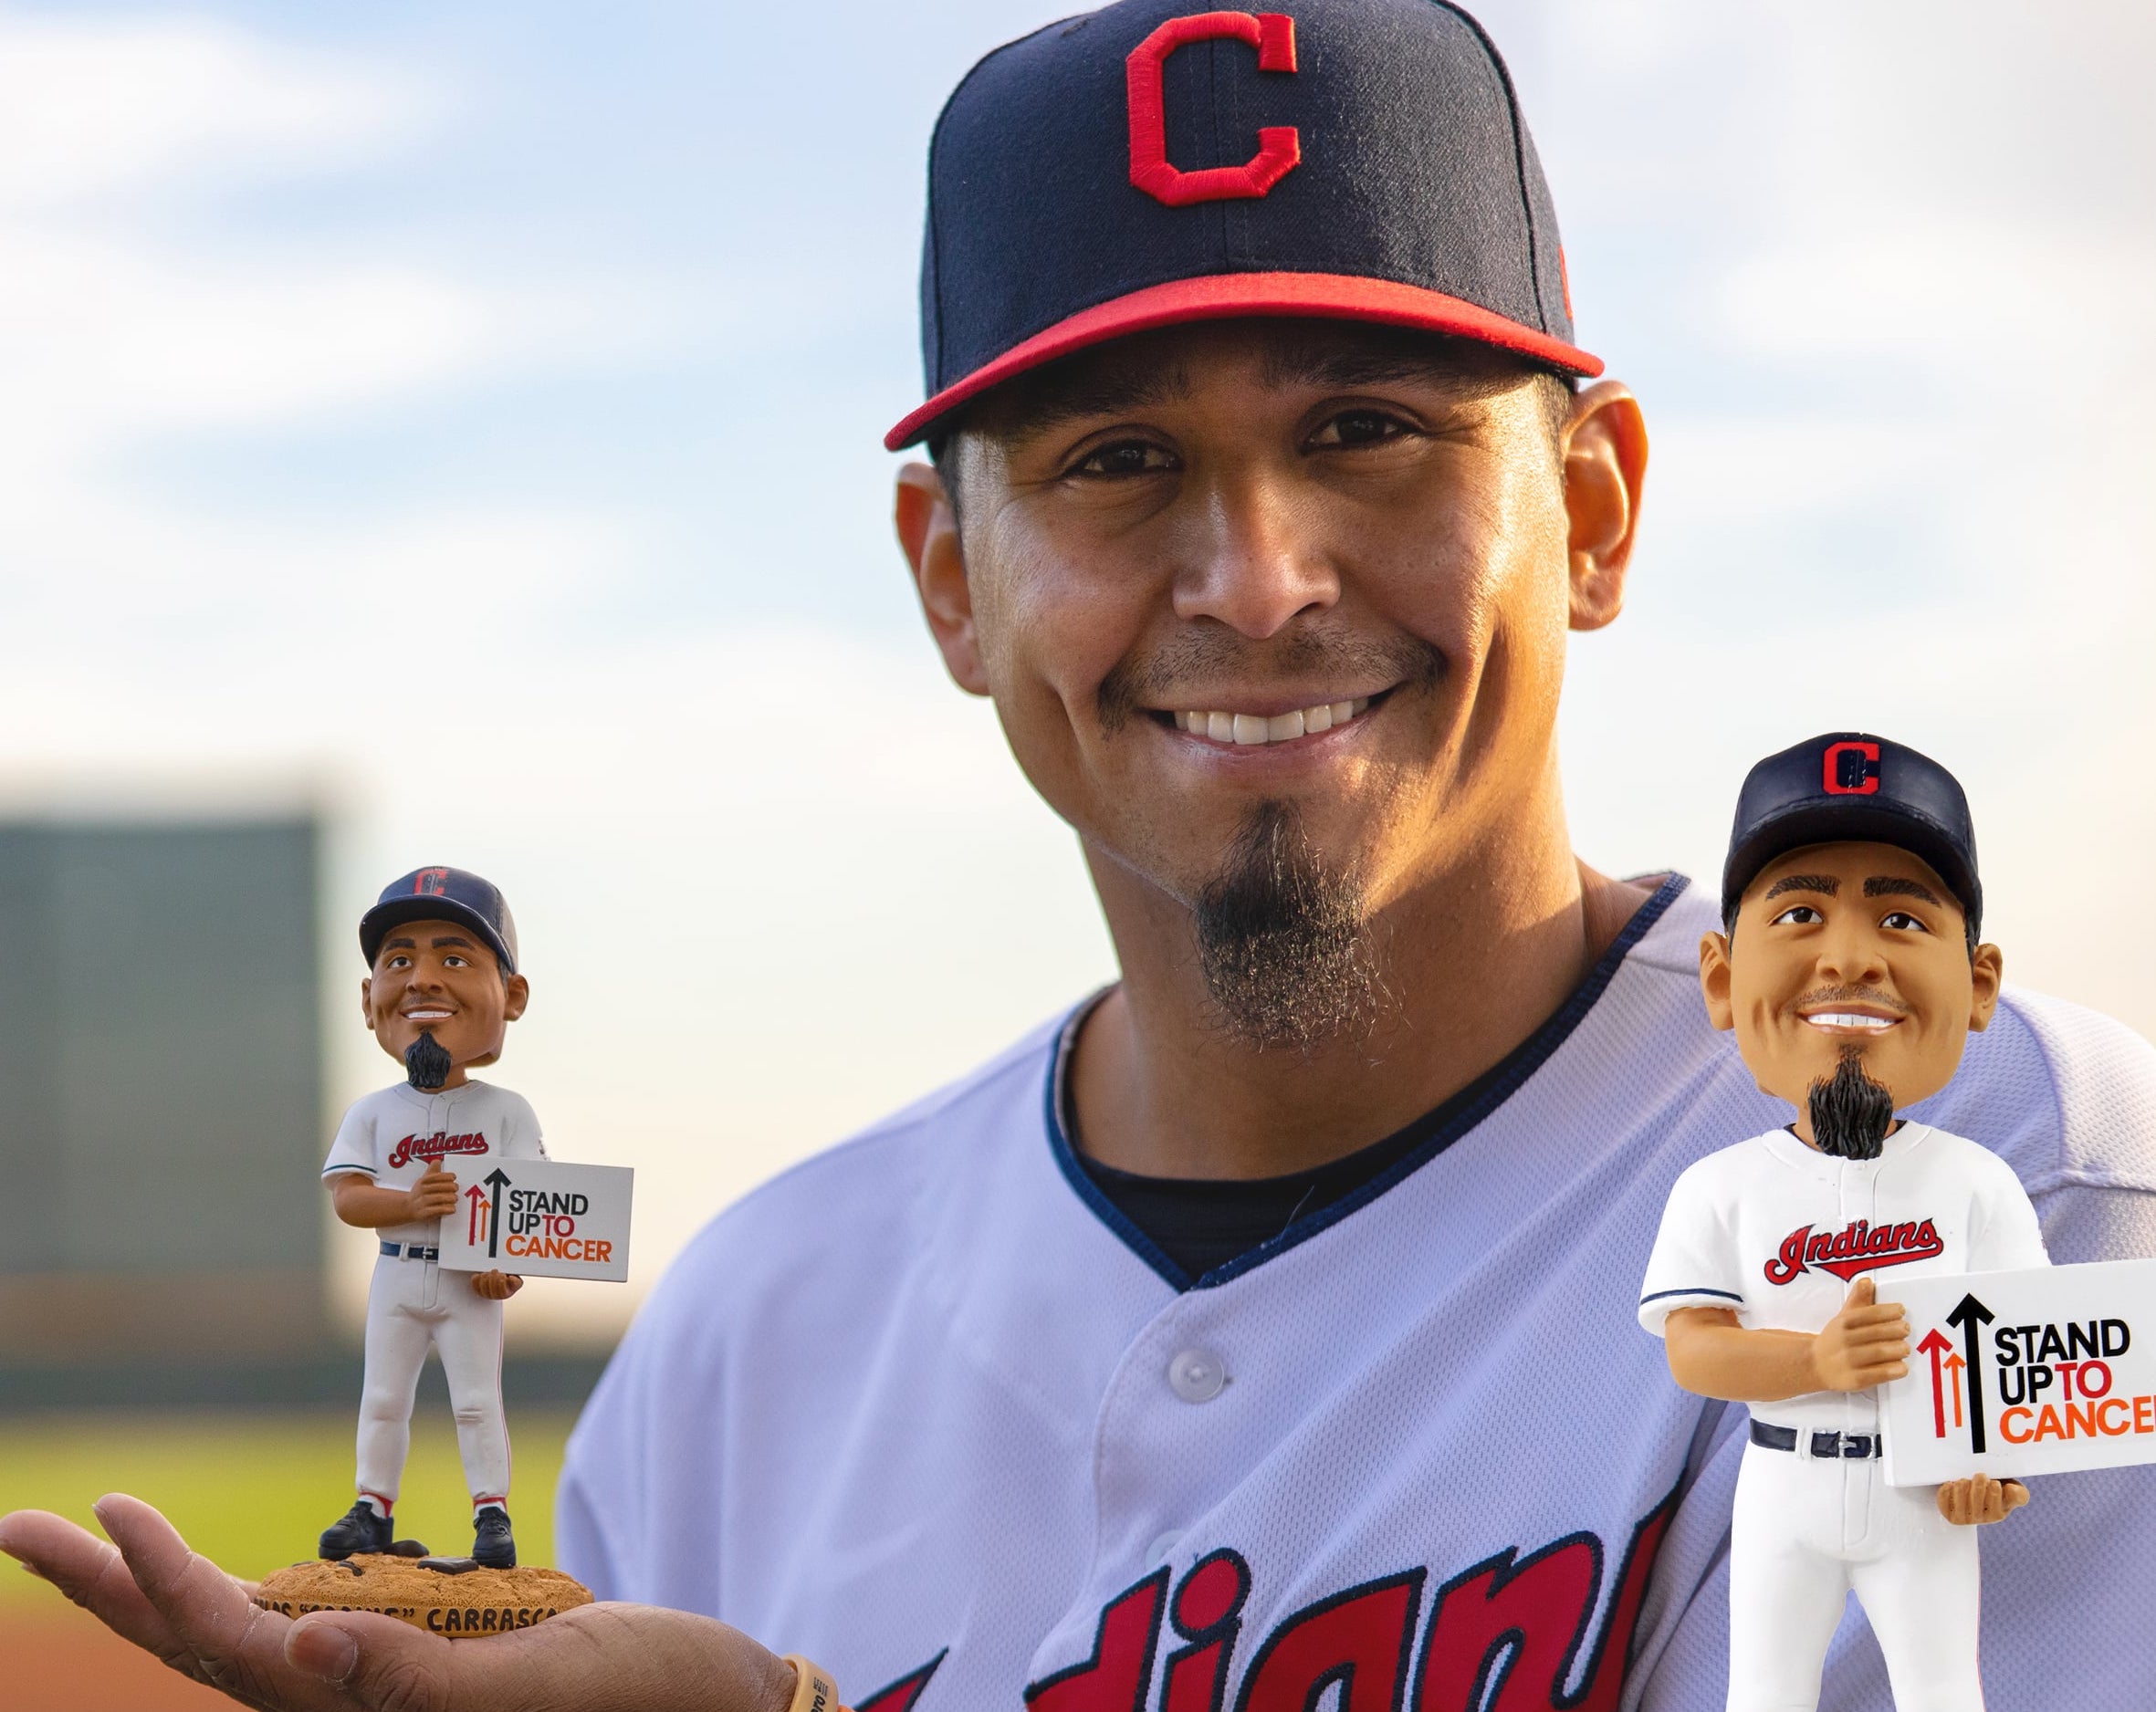 Carlos Carrasco 'Stand Up To Cancer' bobblehead is out 